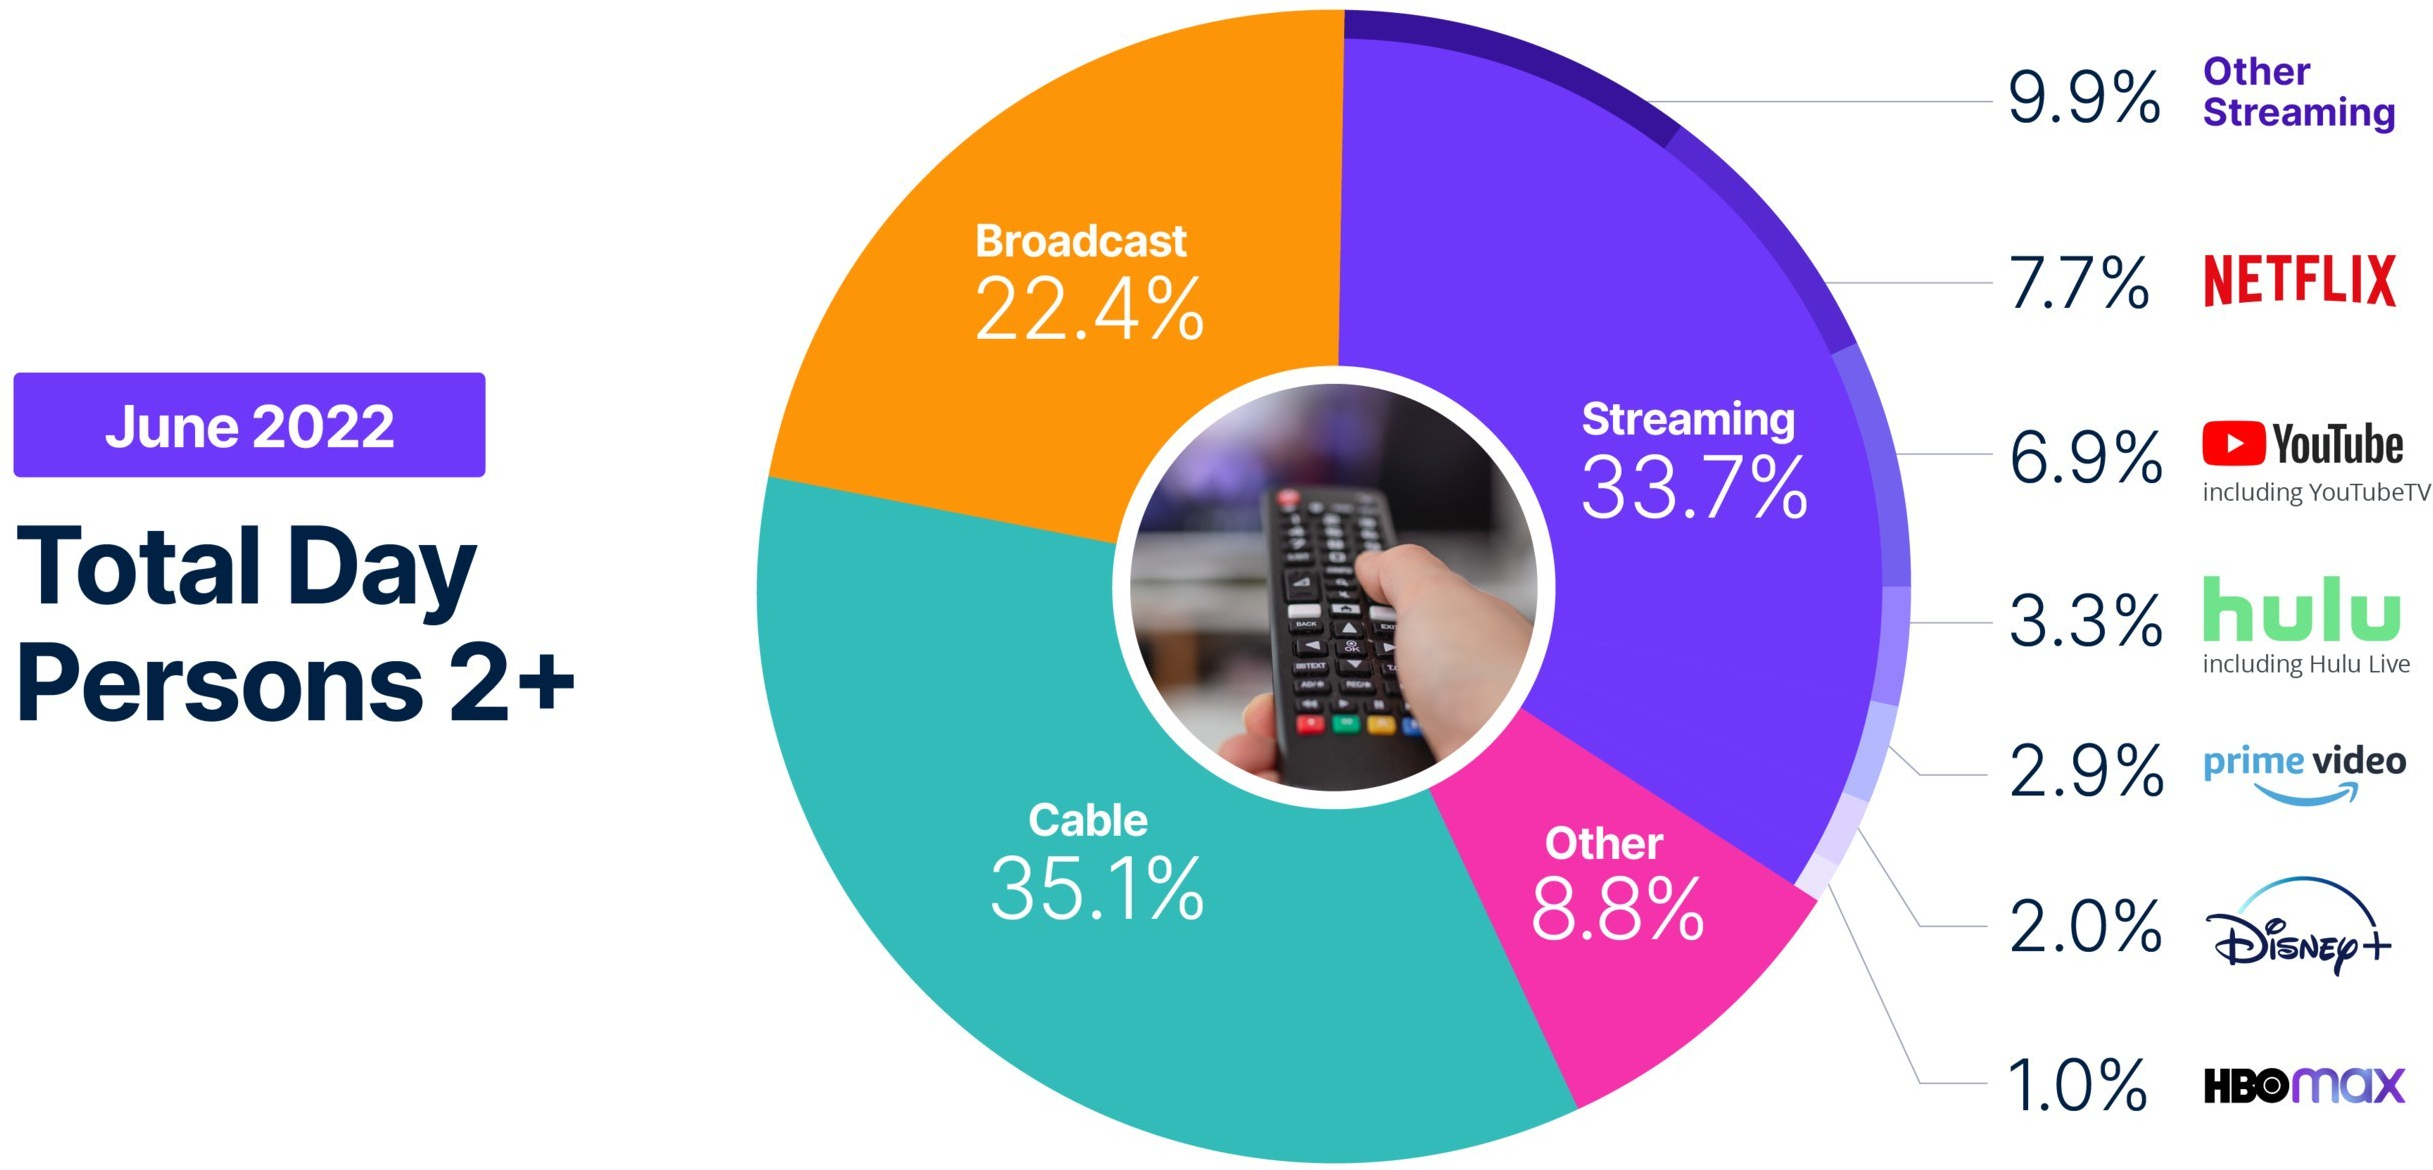 Nielsen monthly U.S. TV and streaming snapshot - Streaming (Netflix, YouTube, Hulu, Prime Video, Disney+, HBOMax, Other), Broadcast, Cable TV, Other - June 2022